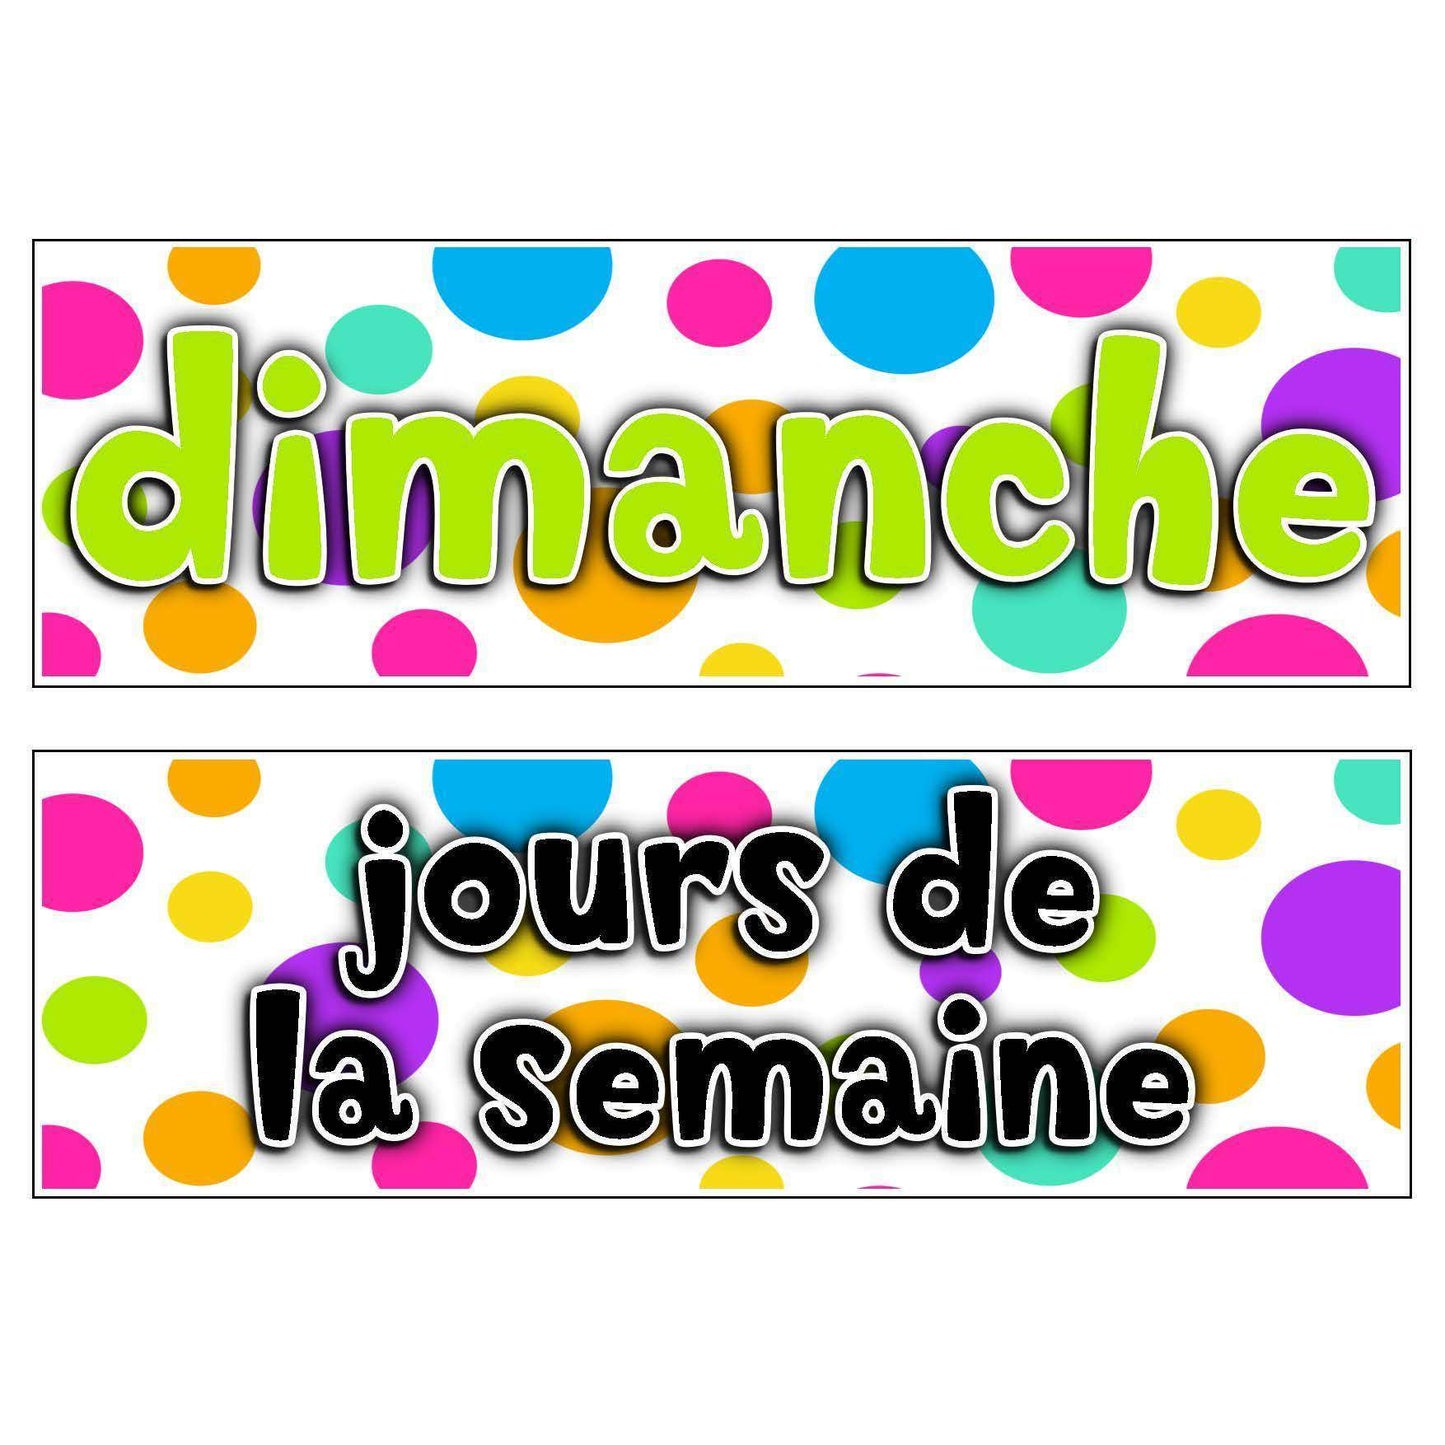 French Polka Dot Days and Months:Primary Classroom Resources